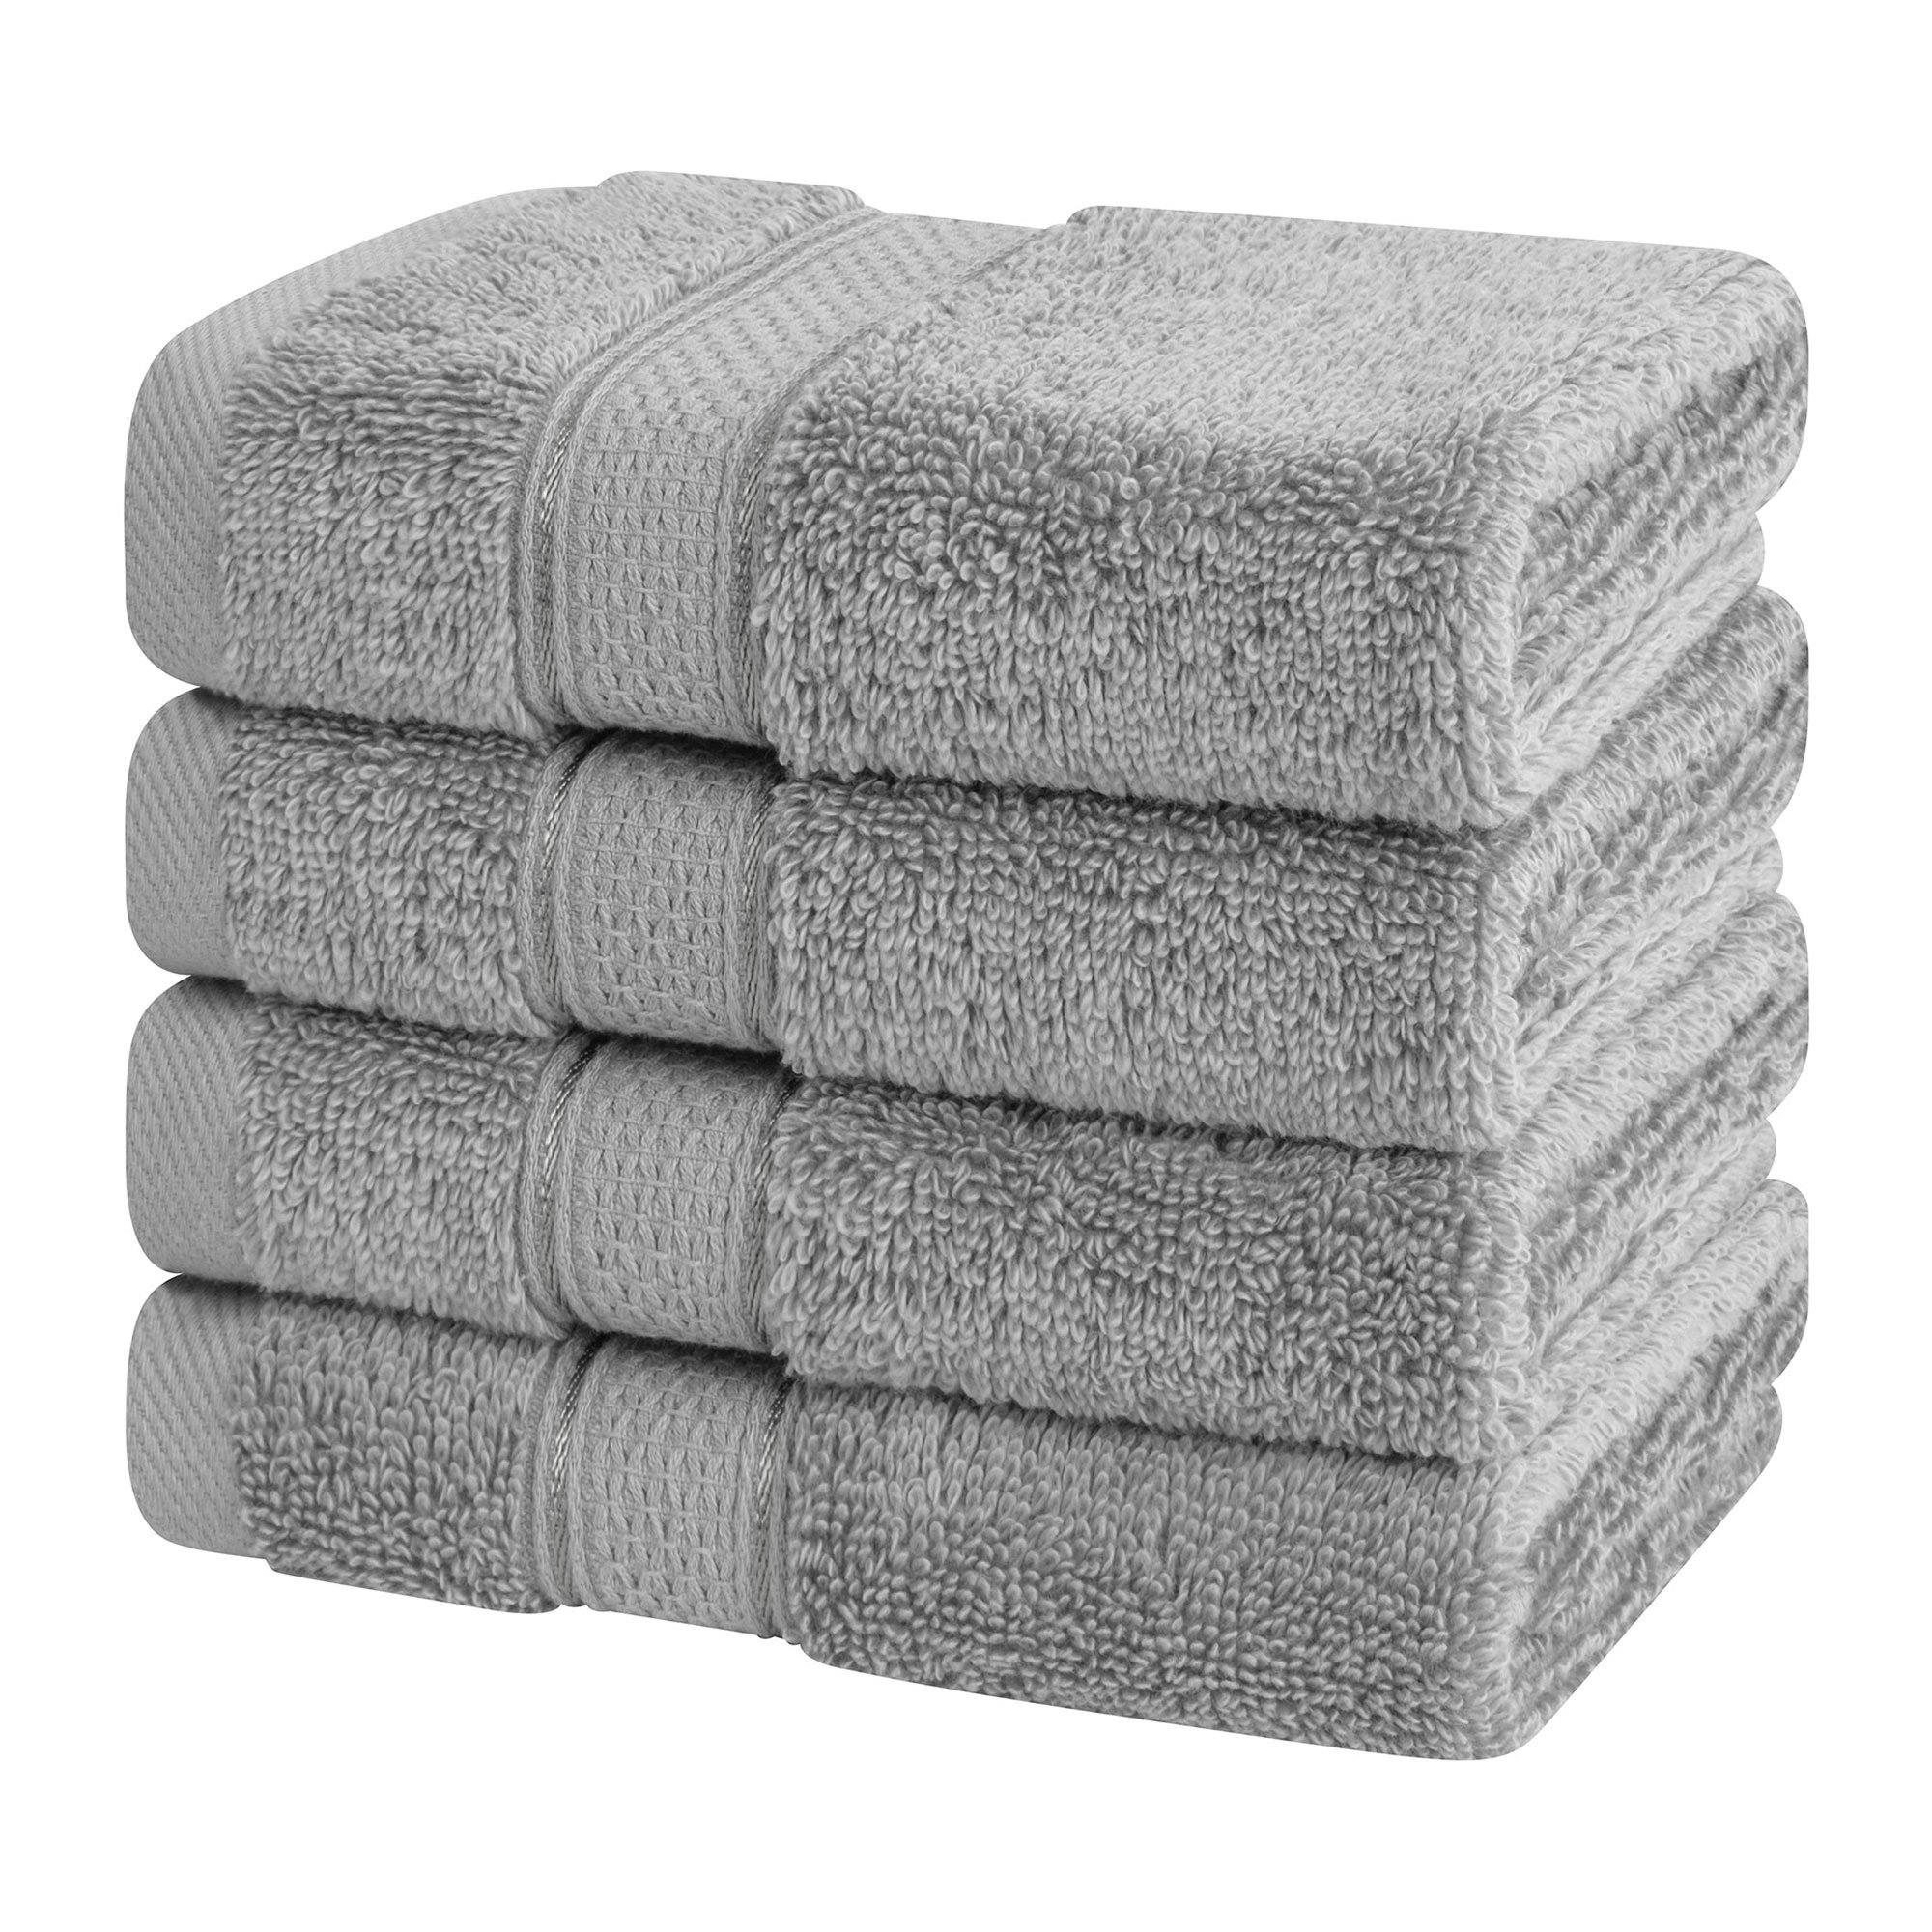 American Soft Linen Washcloth Set 100% Turkish Cotton 4-Piece Face Hand Towels for Bathroom and Kitchen - Sand Taupe